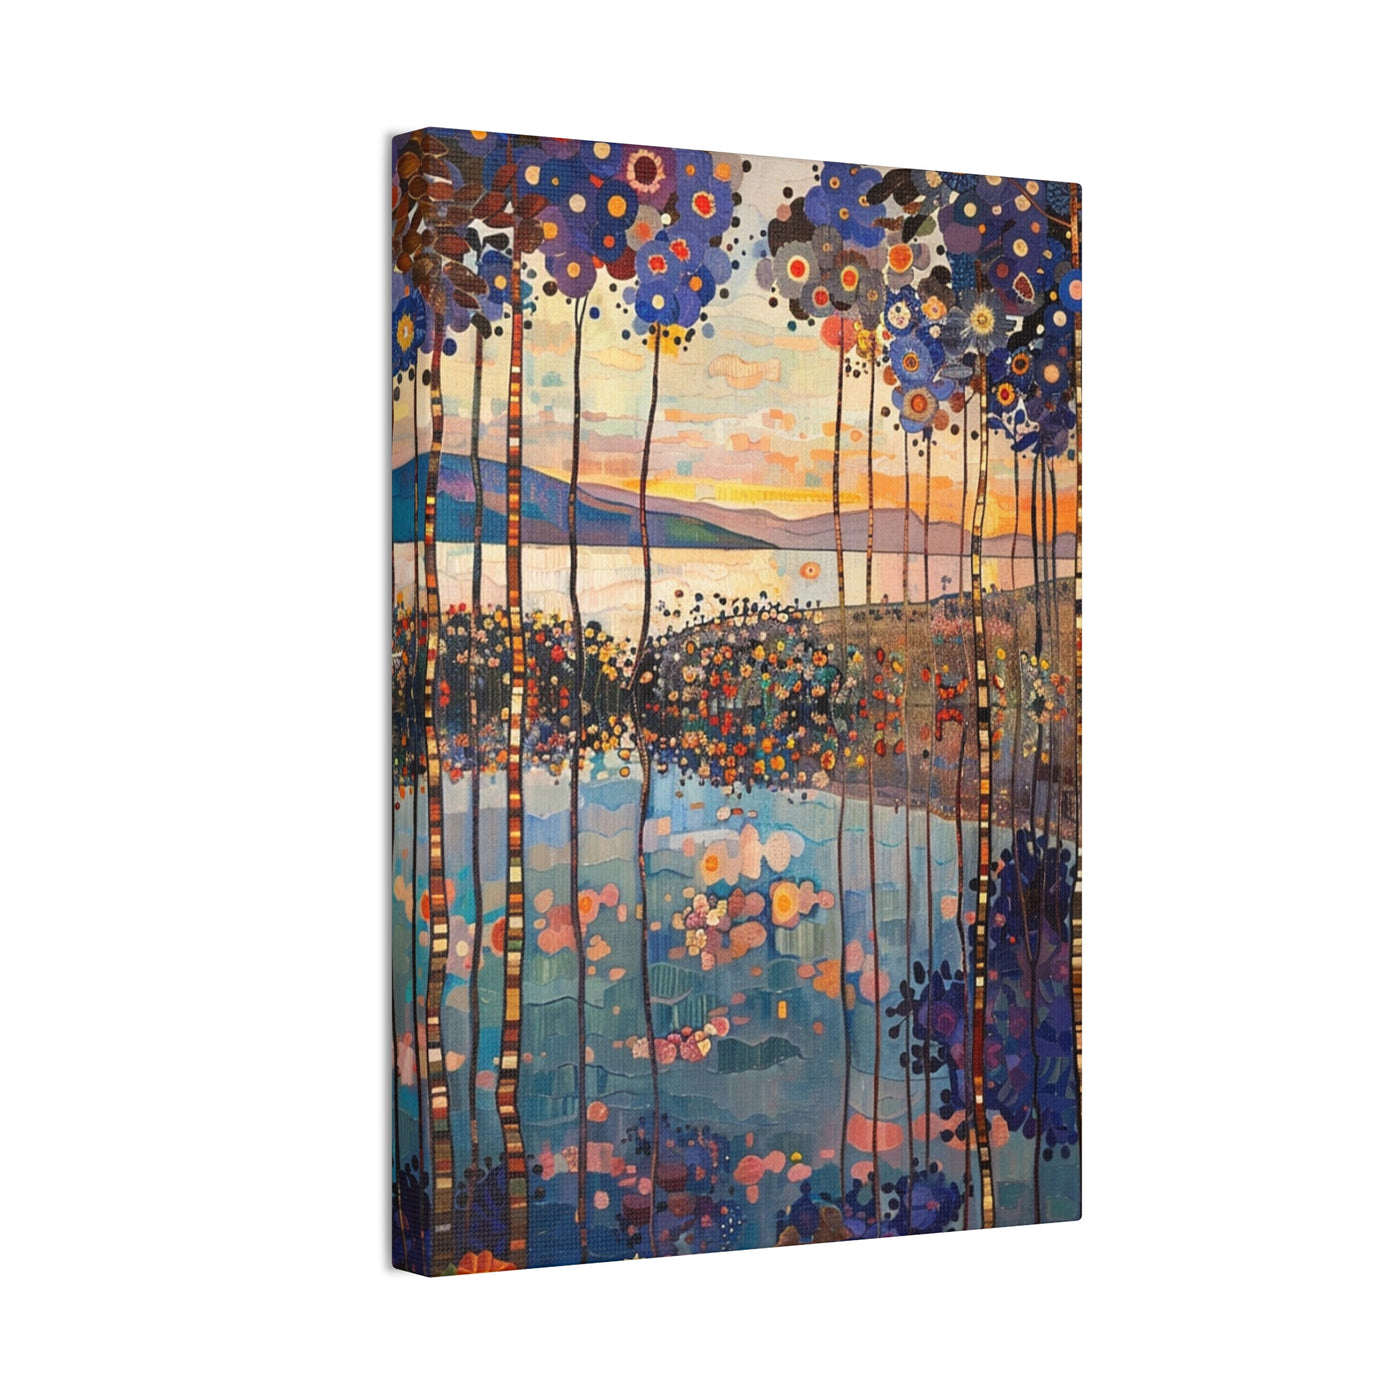 Product image showing canvas wall art of Verdant Echo - Forest and Lake in Intense Colors sideview.